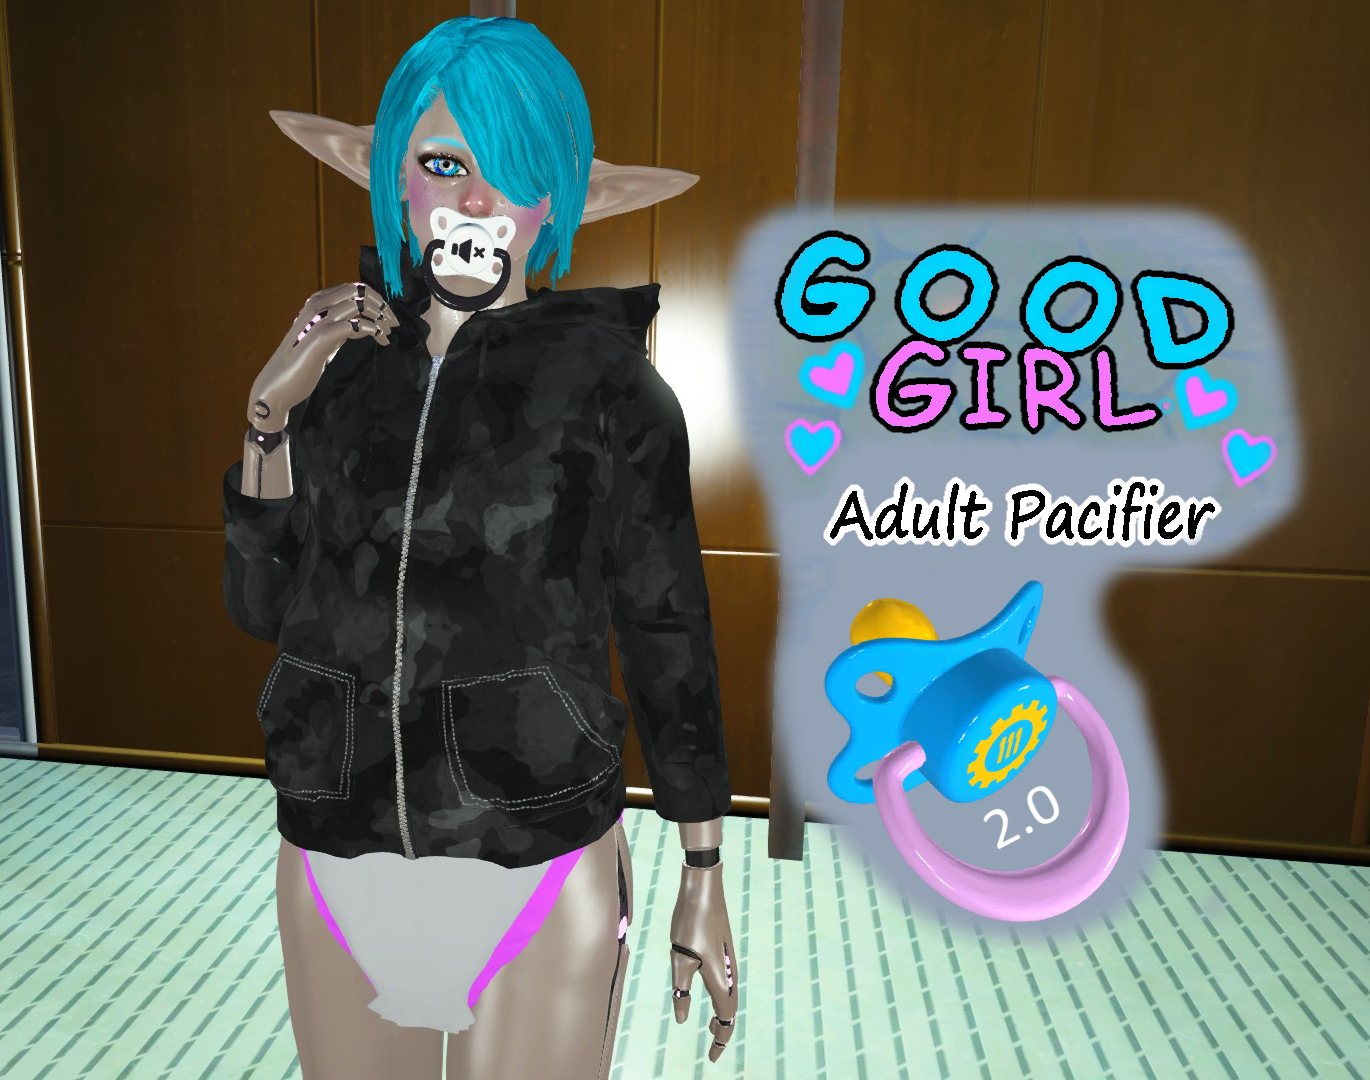 F4 Good Girl Adult Pacifiers 2.0 - Armor and Clothing image